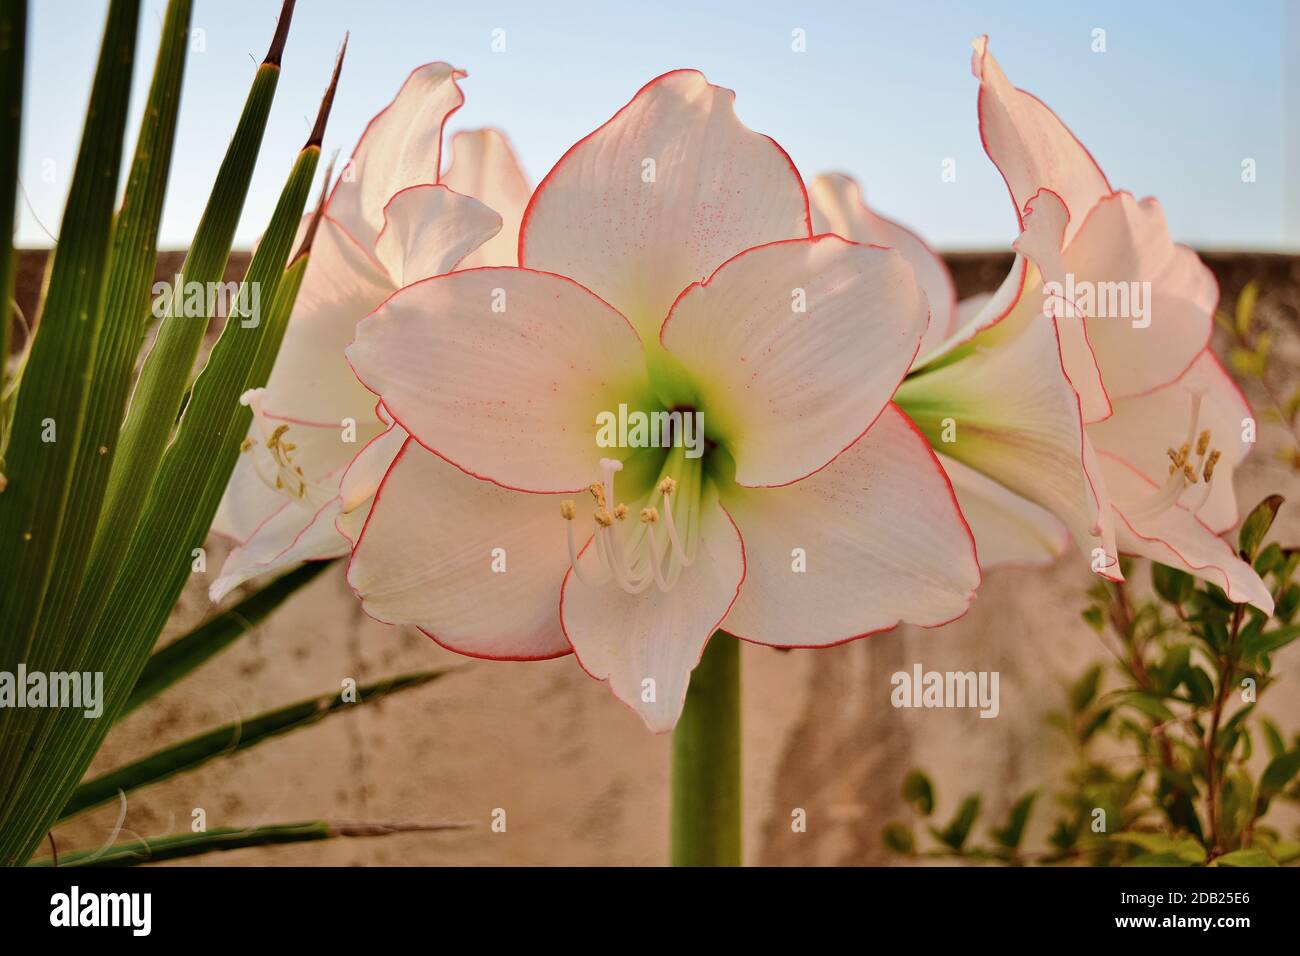 A bouquet of five Picotee Amaryllis flowers from one stem growing on a roof garden in Malta Stock Photo